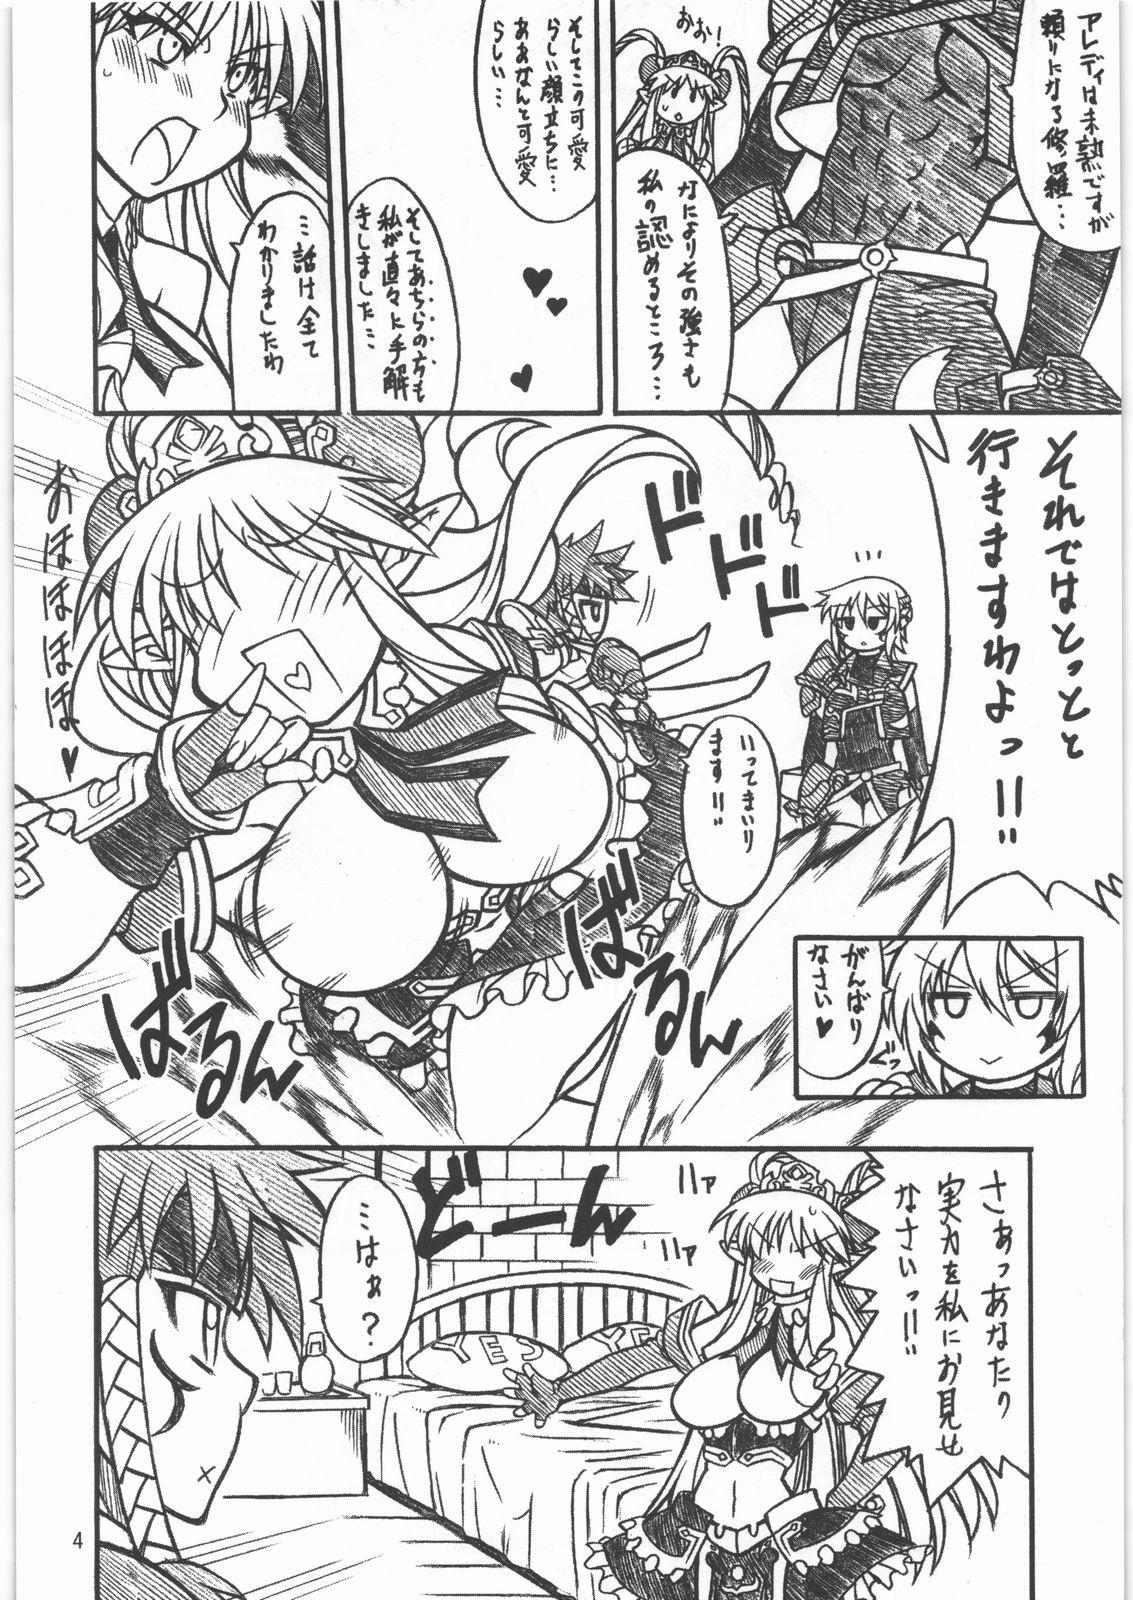 Gay Interracial Midara Hime EXCEED - Super robot wars Endless frontier Analsex - Page 3